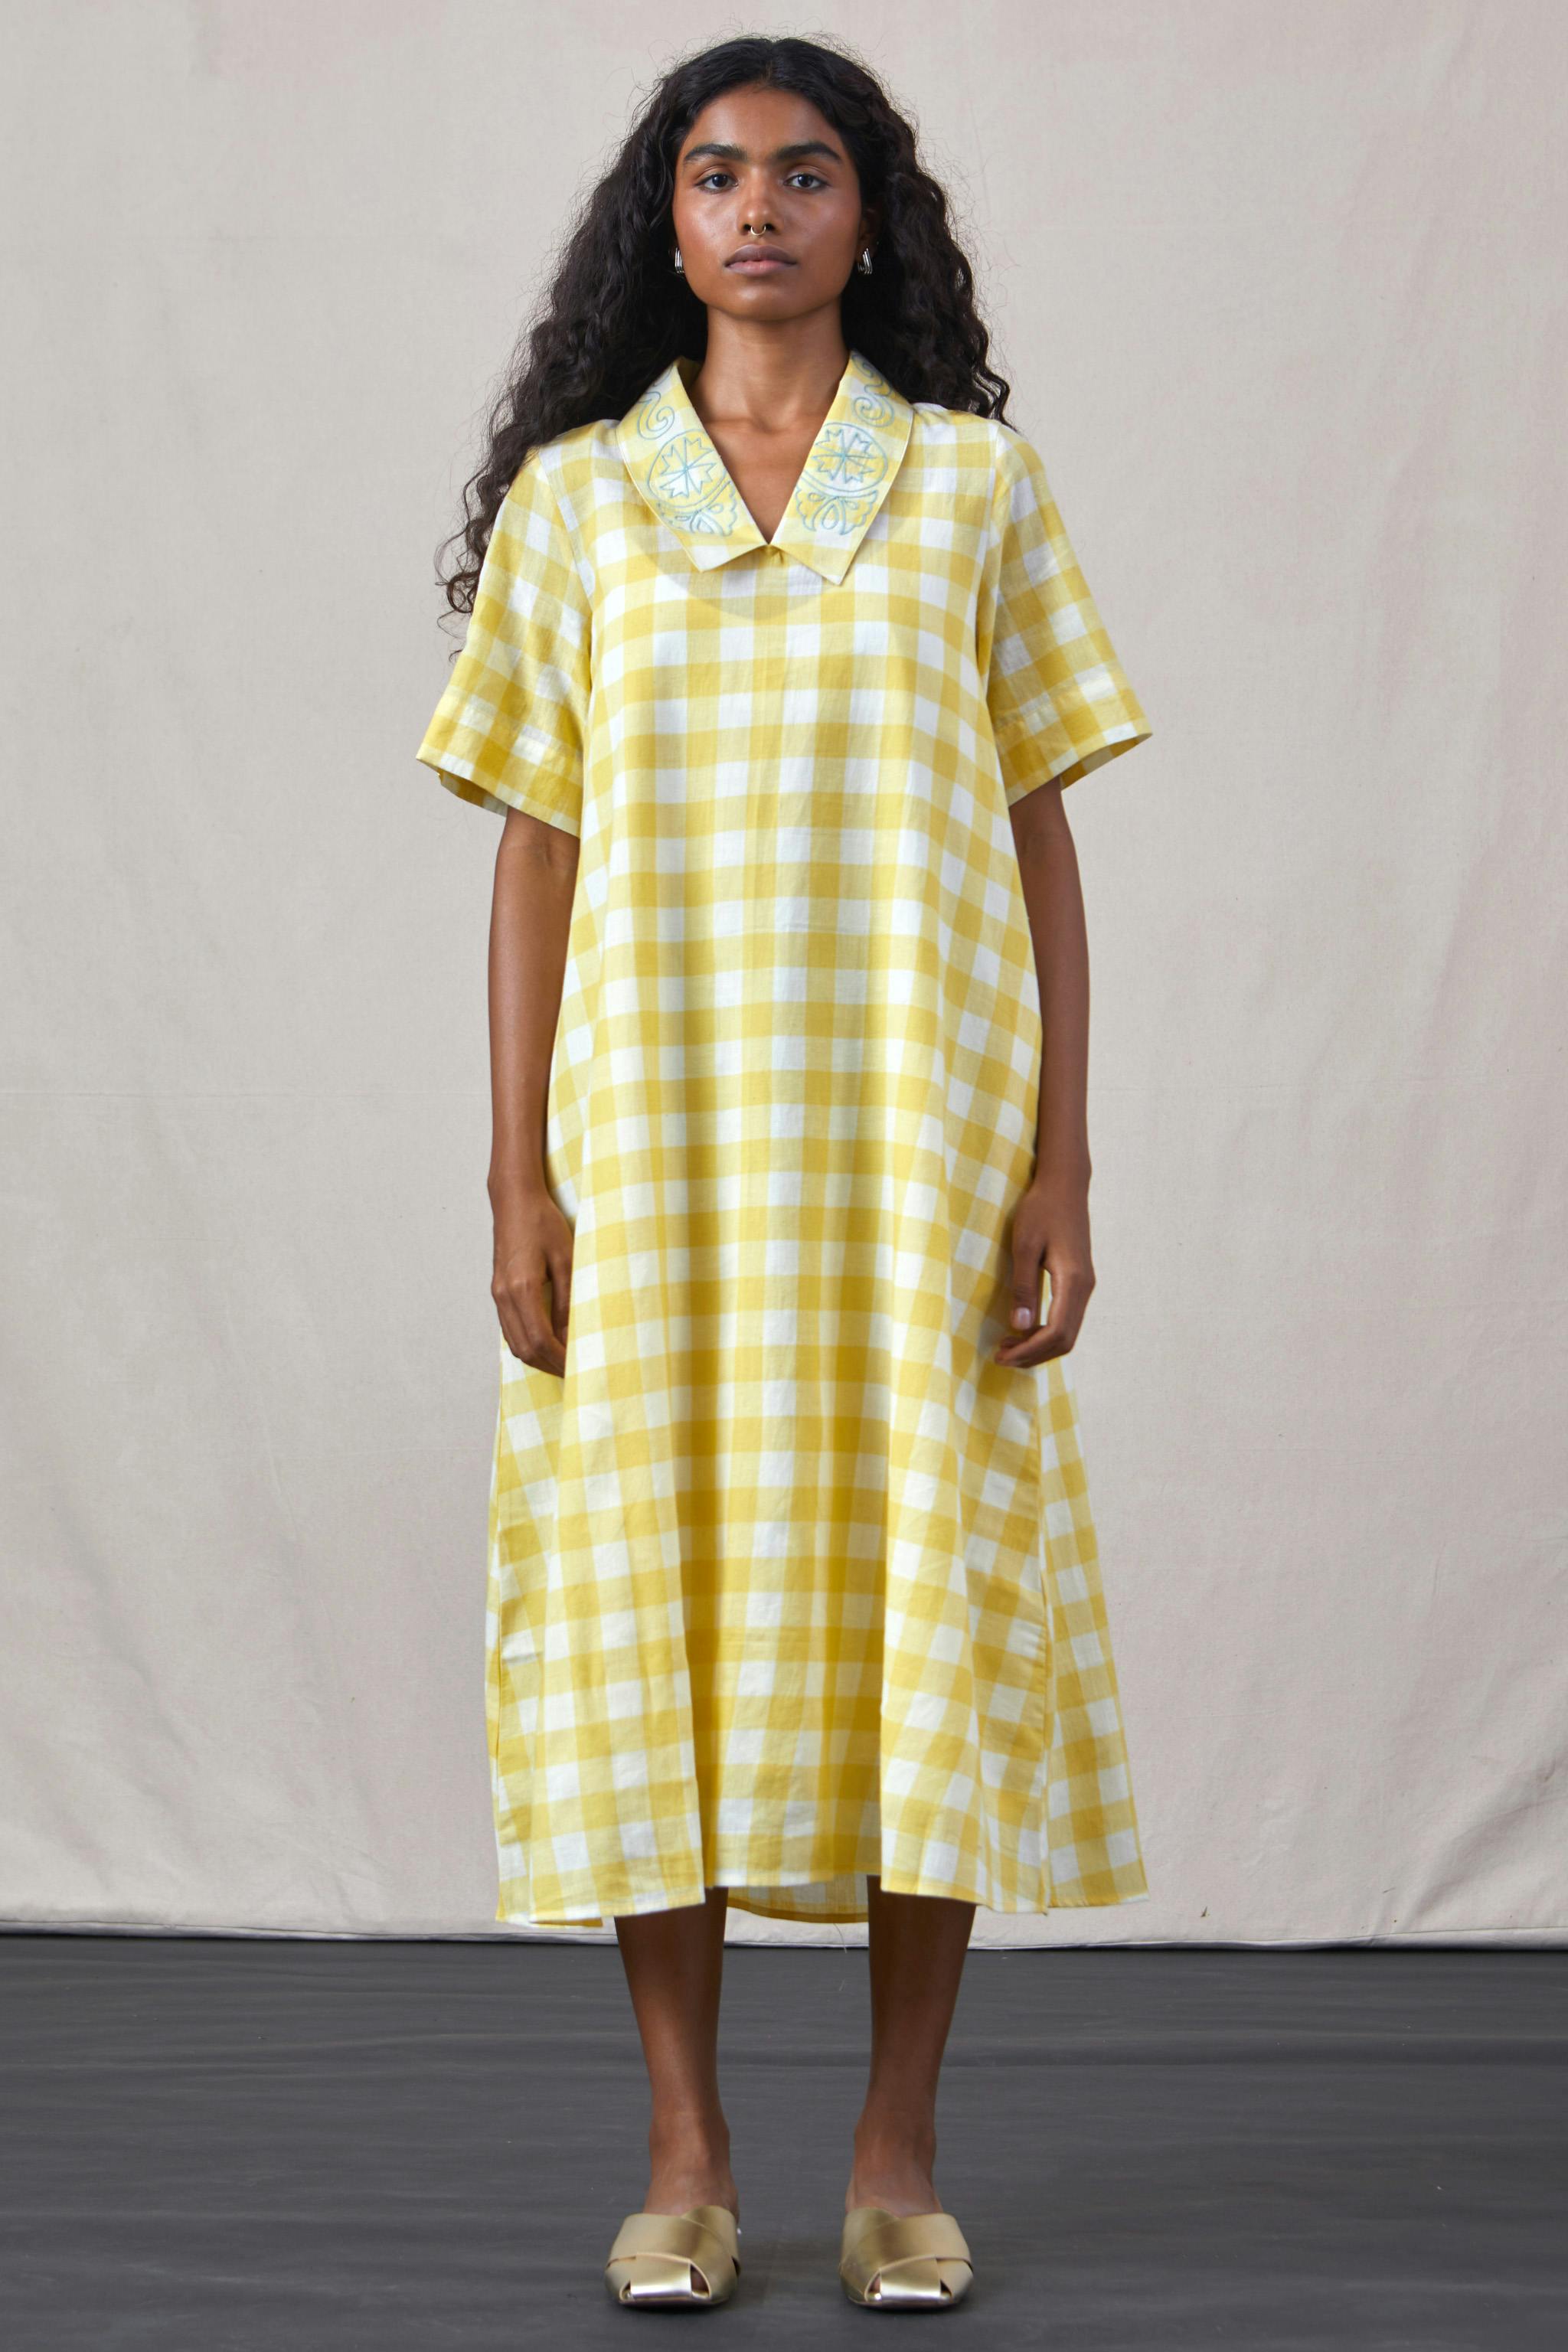 Thumbnail preview #0 for Navvi - Dress Yellow